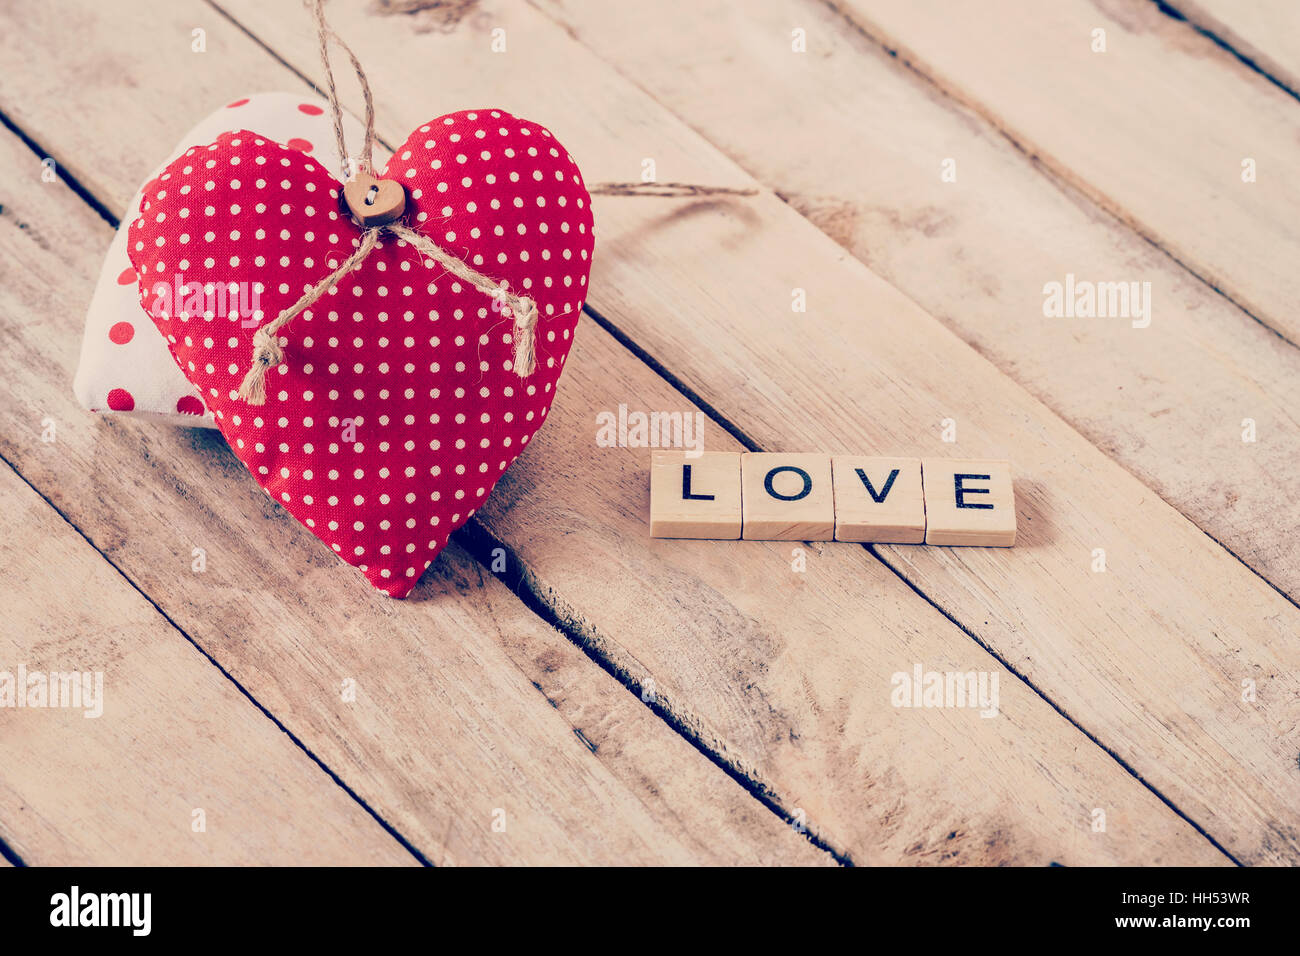 Heart fabric and wood text of LOVE on wooden table background. Stock Photo